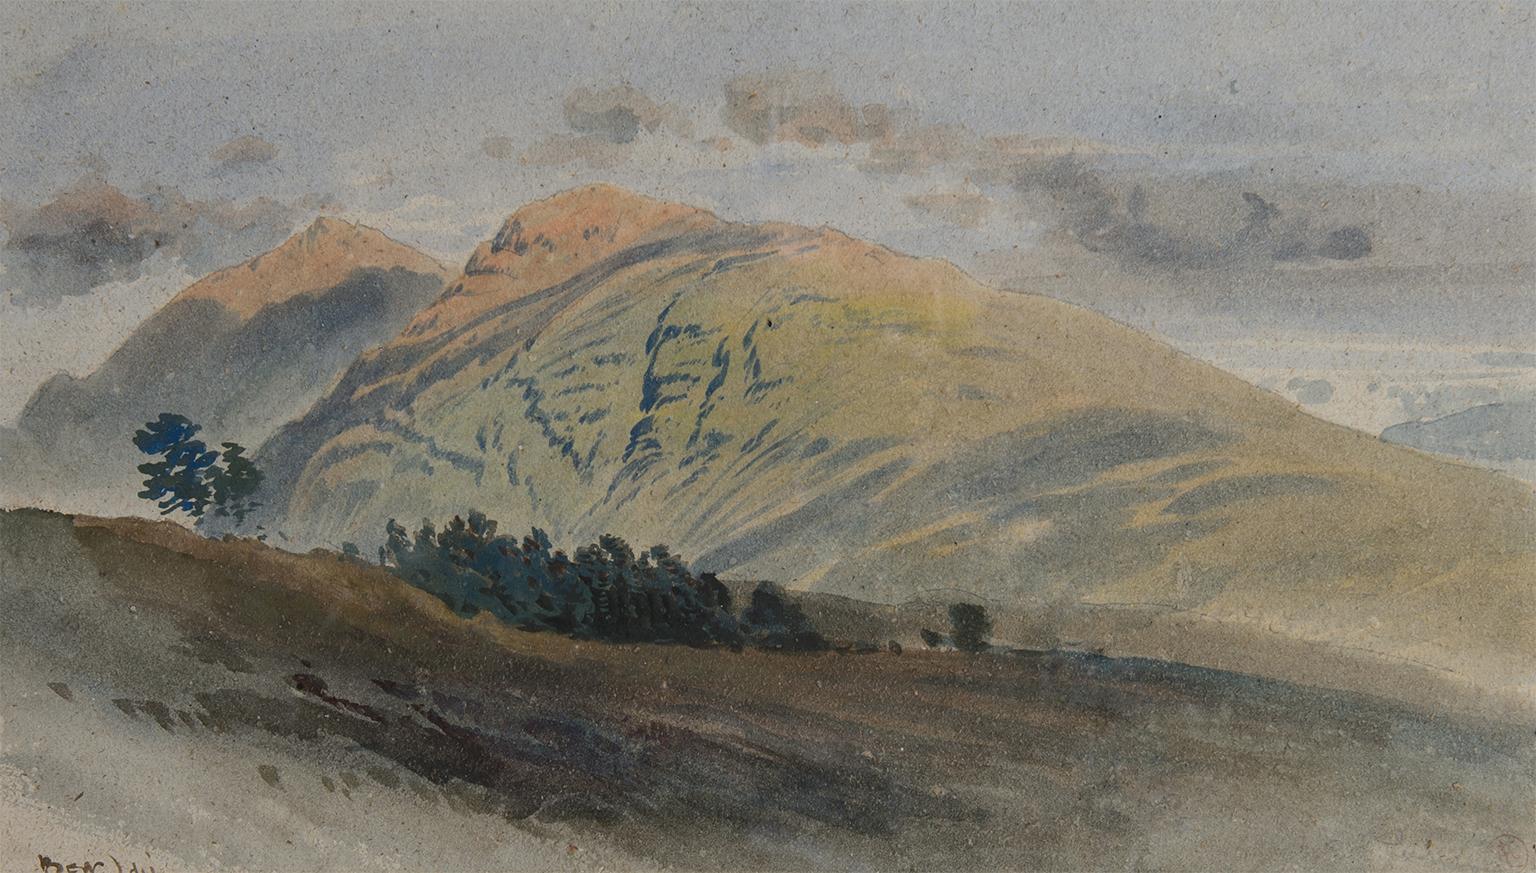 Watercolour over pencil, stamped with studio stamp, in a gilt frame. Dimensions are 25 x 44 cm unframed, 44.5 x 62 cm framed.

Harry John Johnson was a pupil of William James Müller (1812-1845) and travelled extensively in the Near East (on Sir